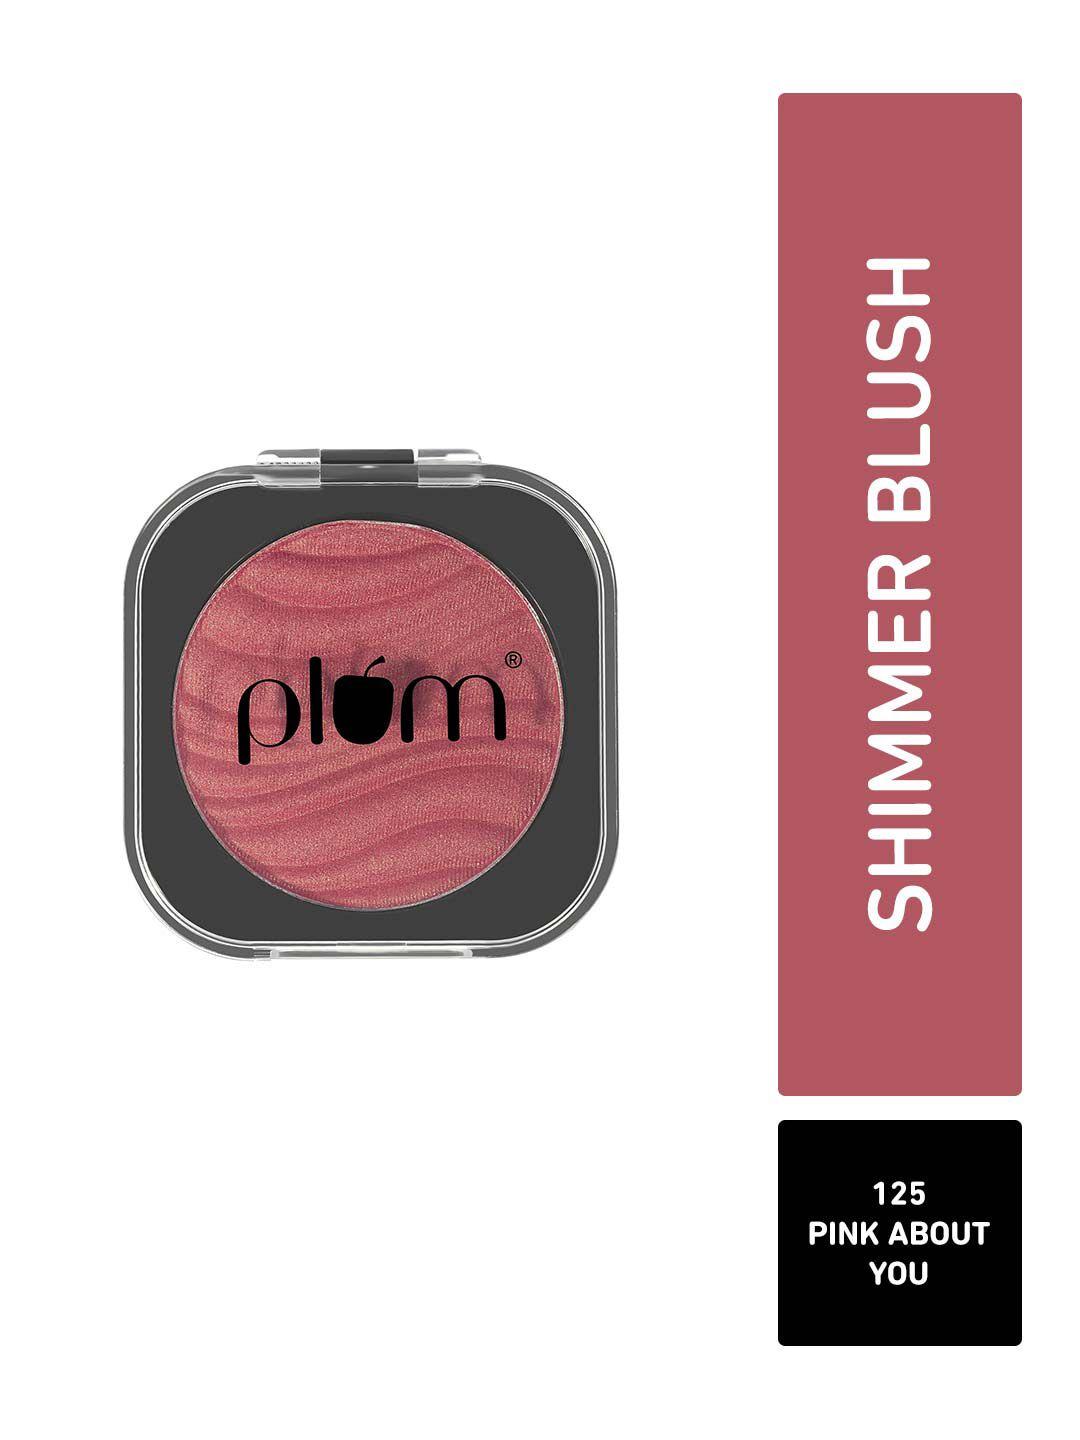 plum cheek-a-boo highly-pigmented shimmer blush 4.5g - pink about you 125